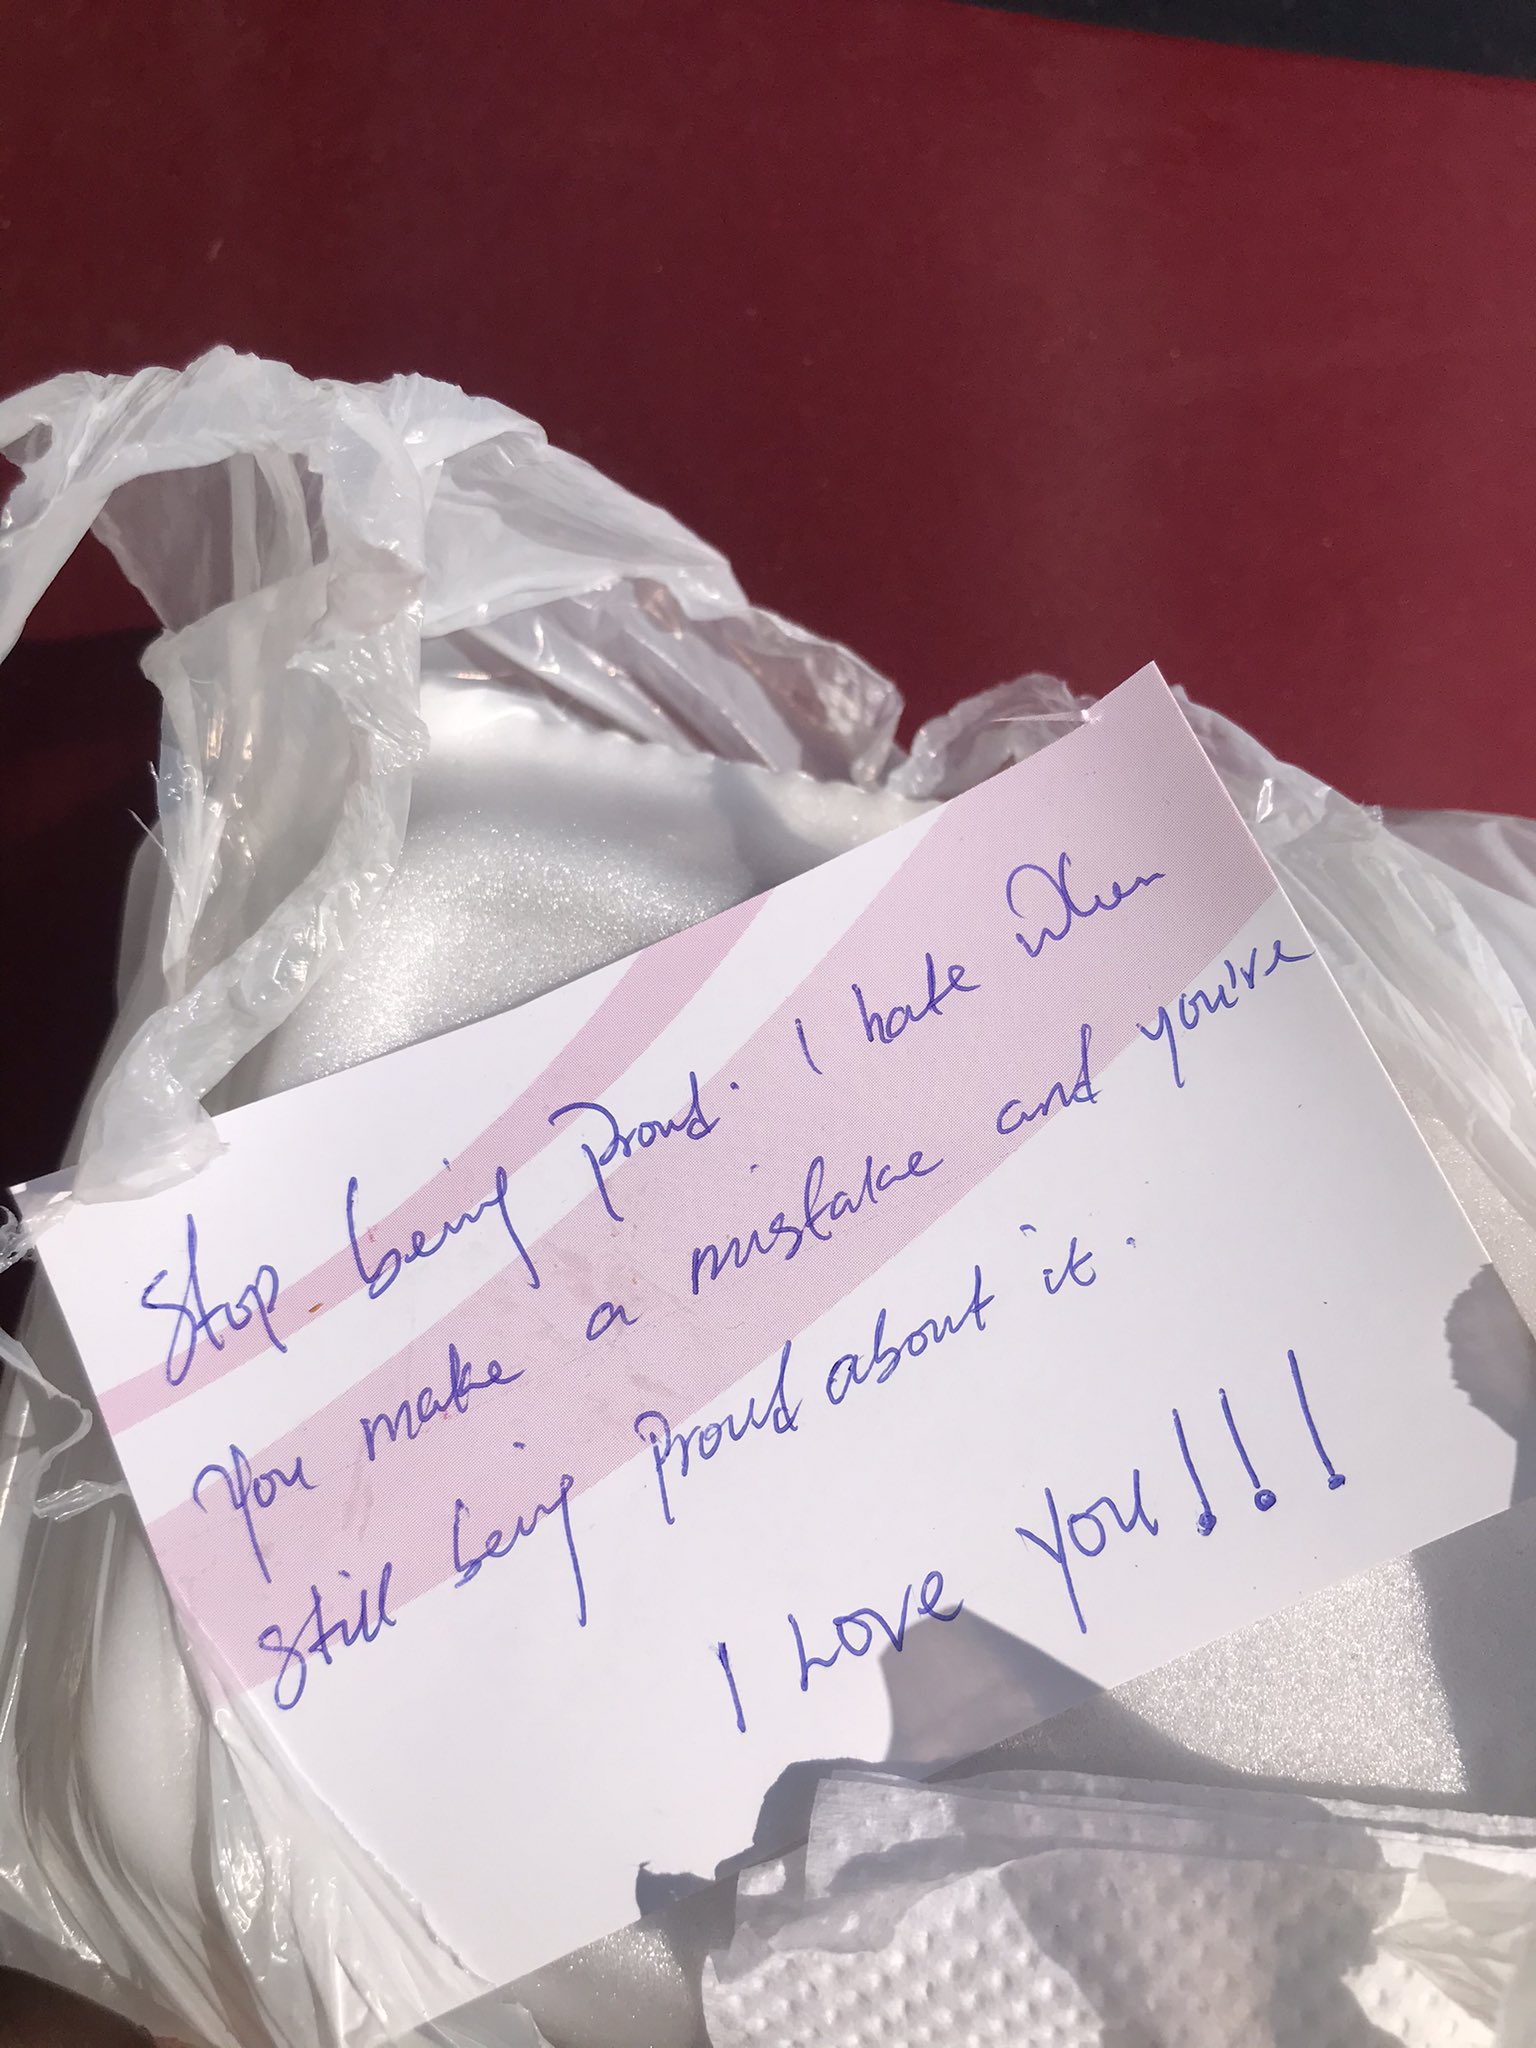 Twitter Users Shame Man After His Girlfriend Shared a Photo Of The Gift She Got From Him